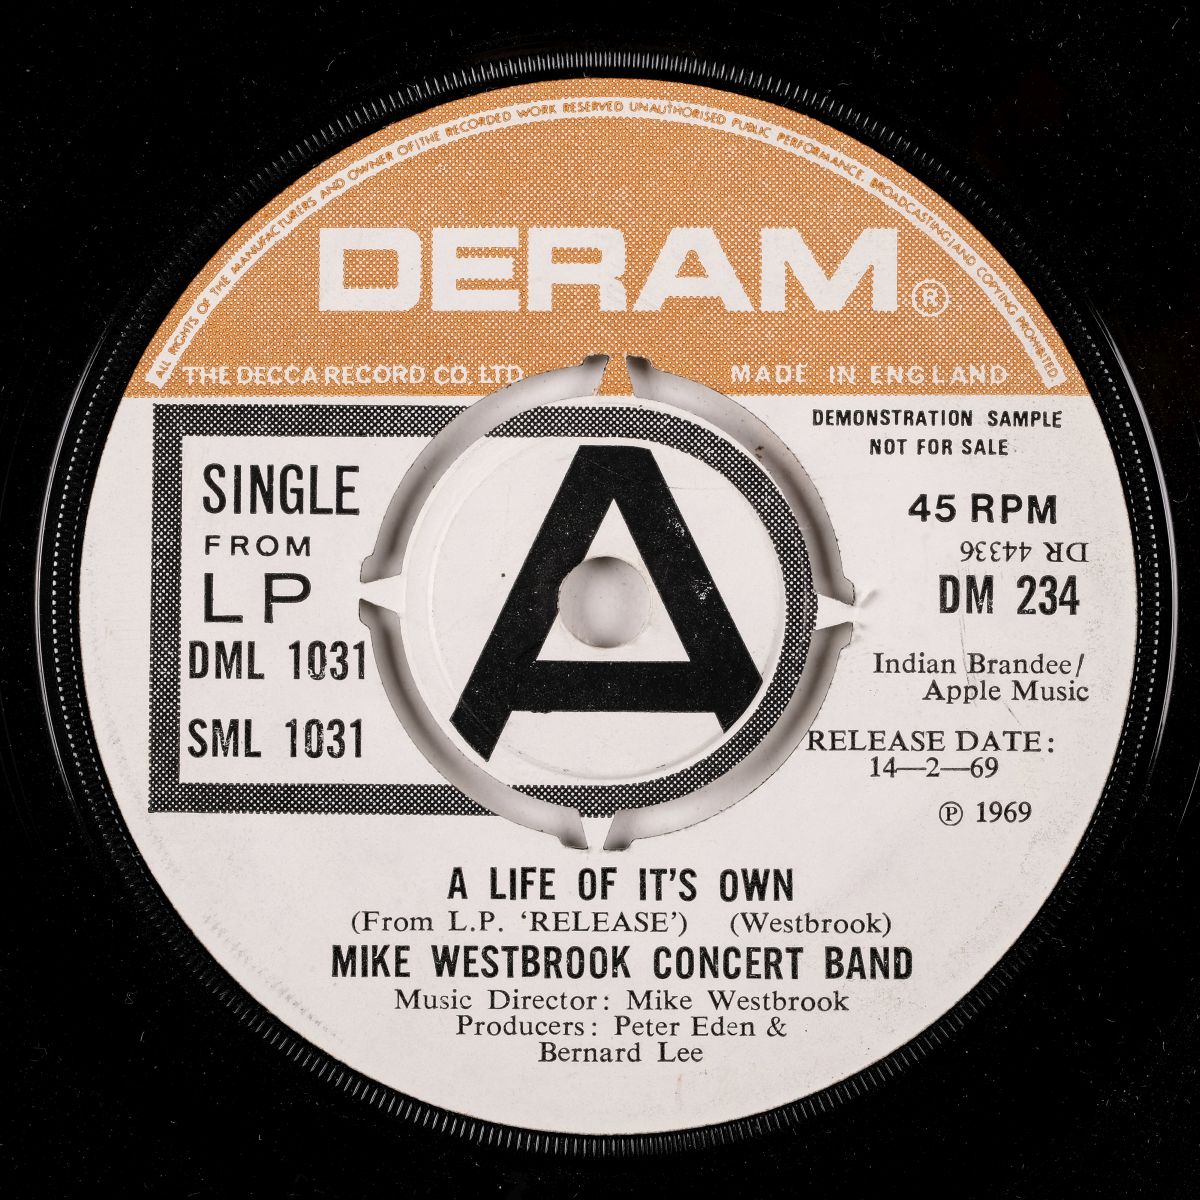 * Jazz. Pair of rare promo singles by The Mike Westbrook Concert Band (Deram, DM311 / DM234) - Image 8 of 9